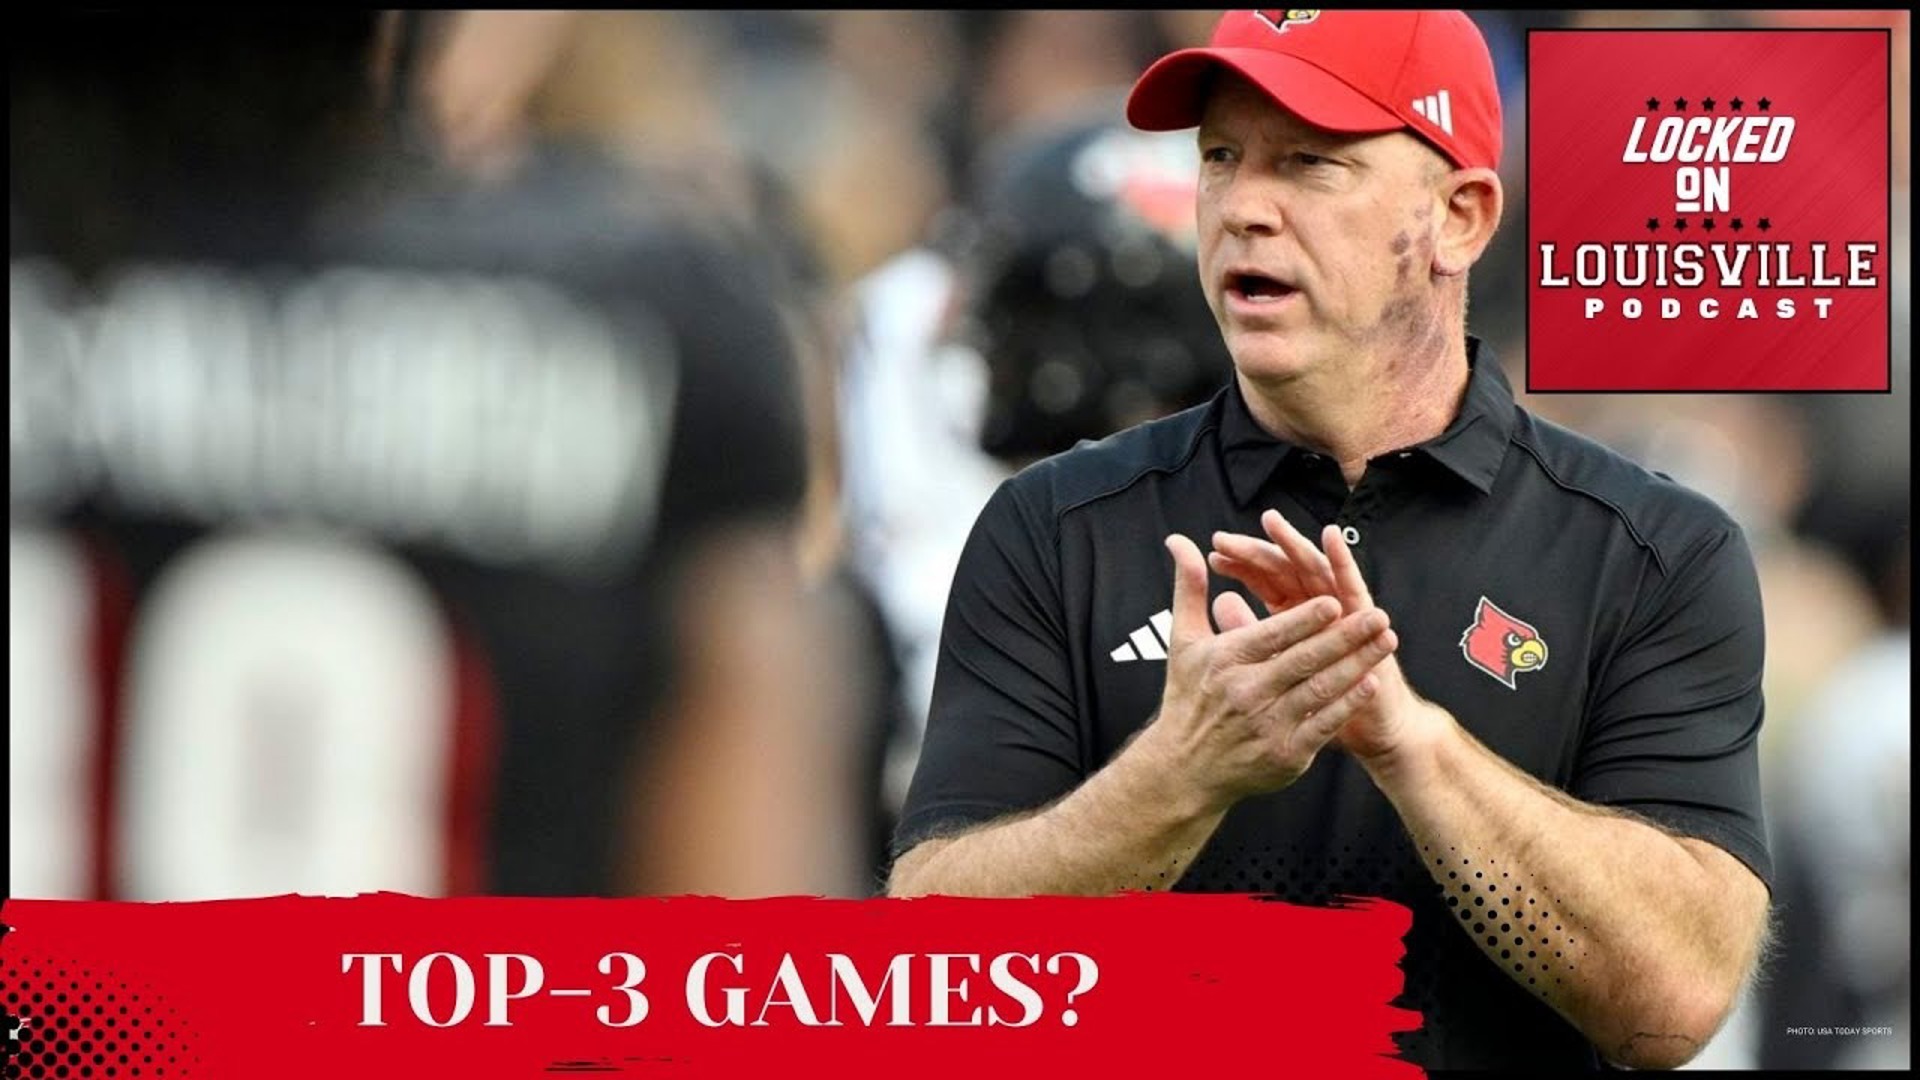 Dalton ranks the three most important games for the Louisville Cardinals football team.